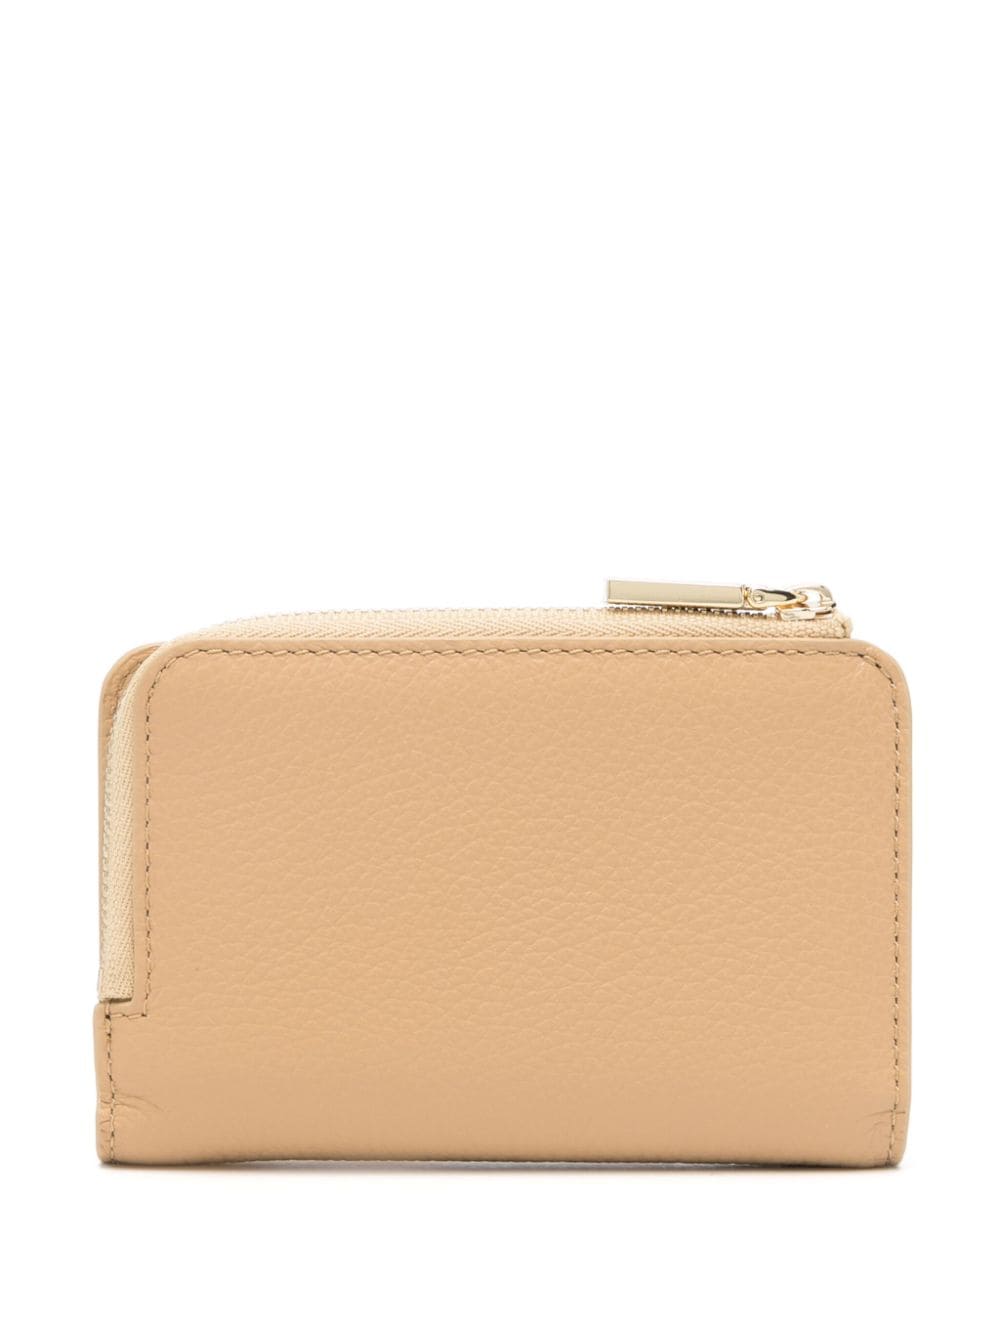 Coccinelle small Metallic Soft leather wallet - Beige